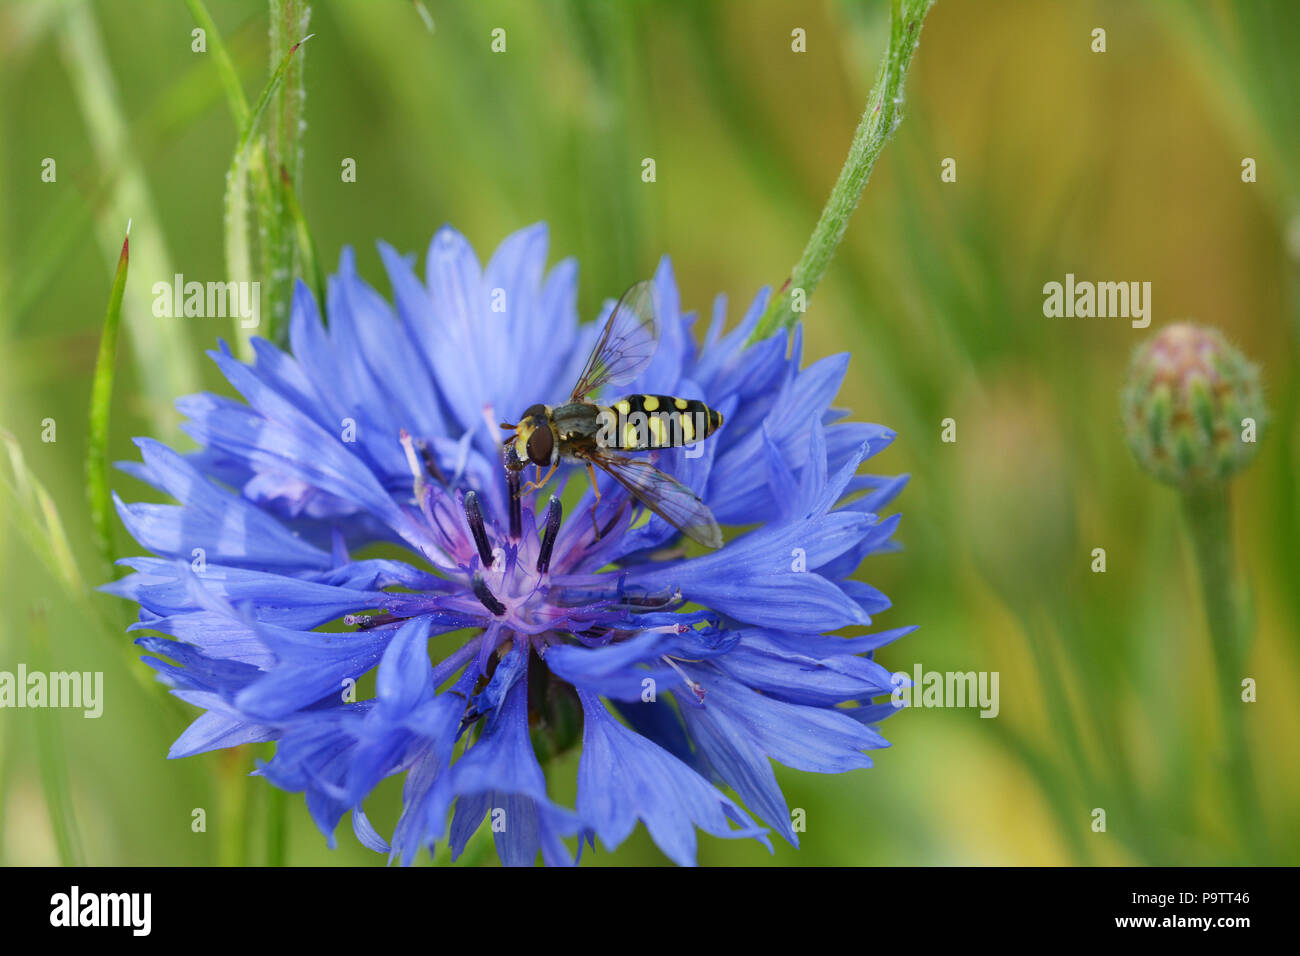 Hoverfly lands on a blue cornflower bloom in a garden Stock Photo